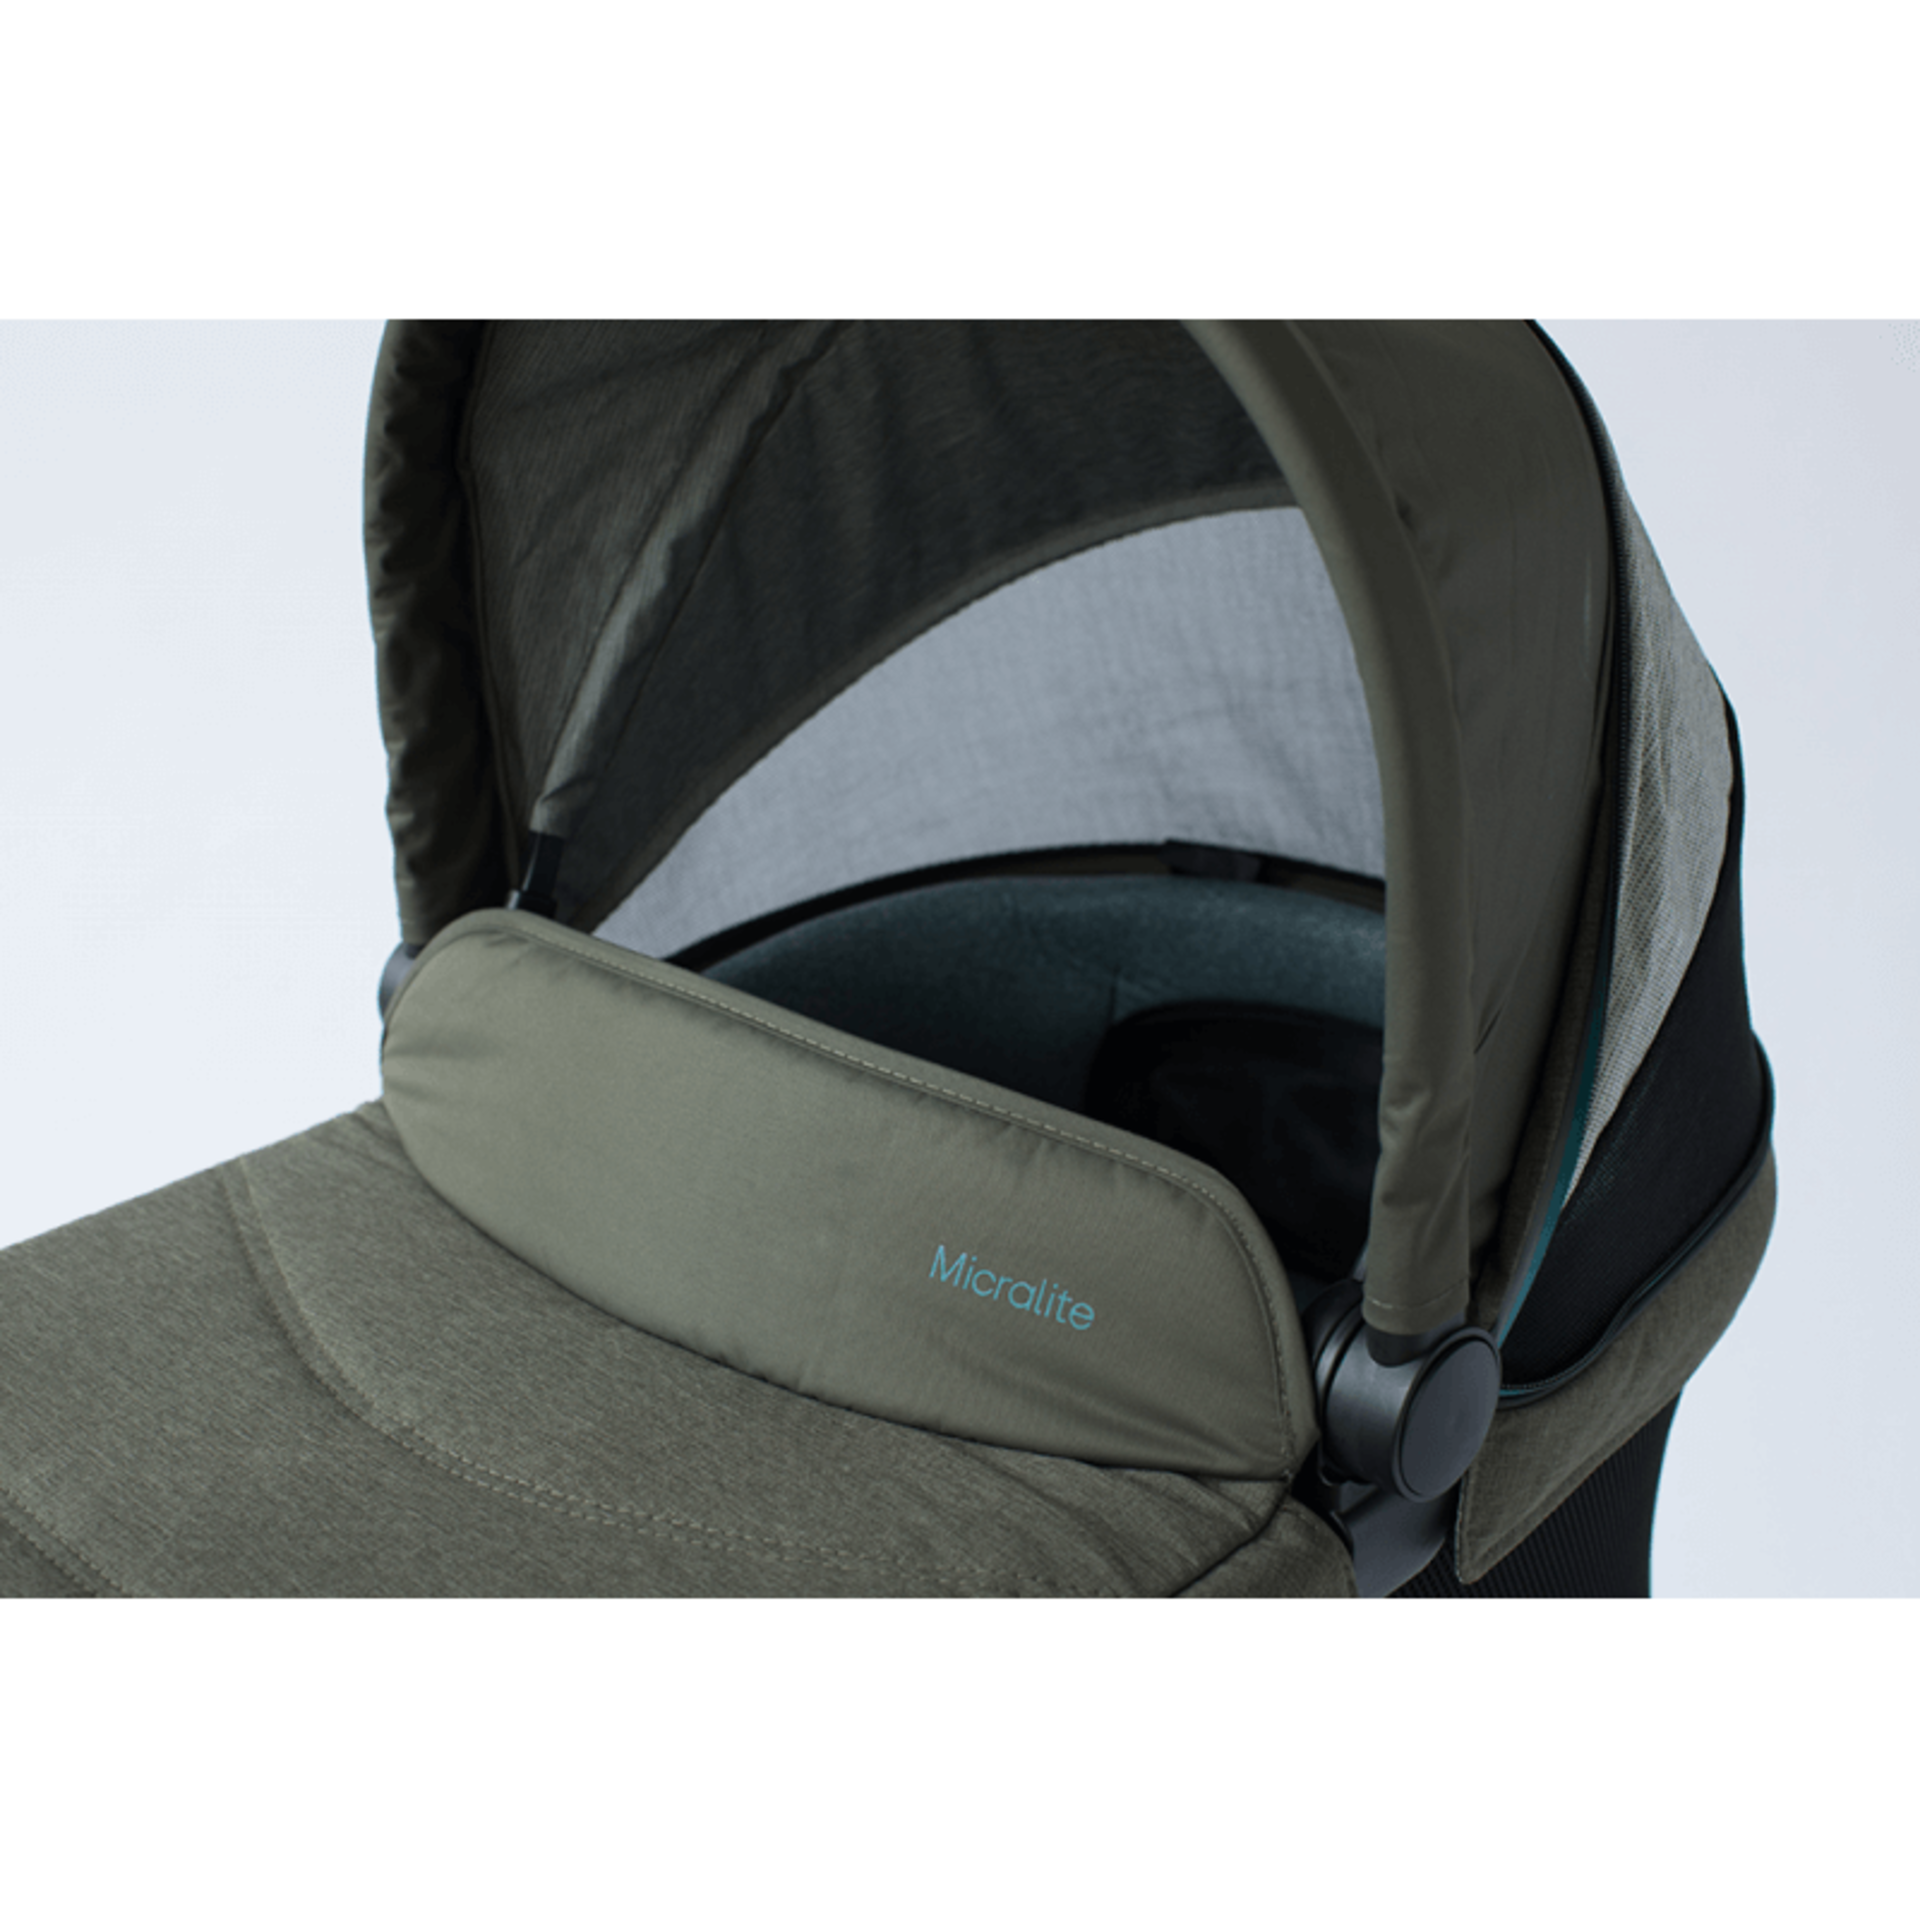 New & Boxed Micralite by Silver Cross Carrycot – Evergreen. RRP £230. The Micralite carrycot is - Bild 3 aus 3